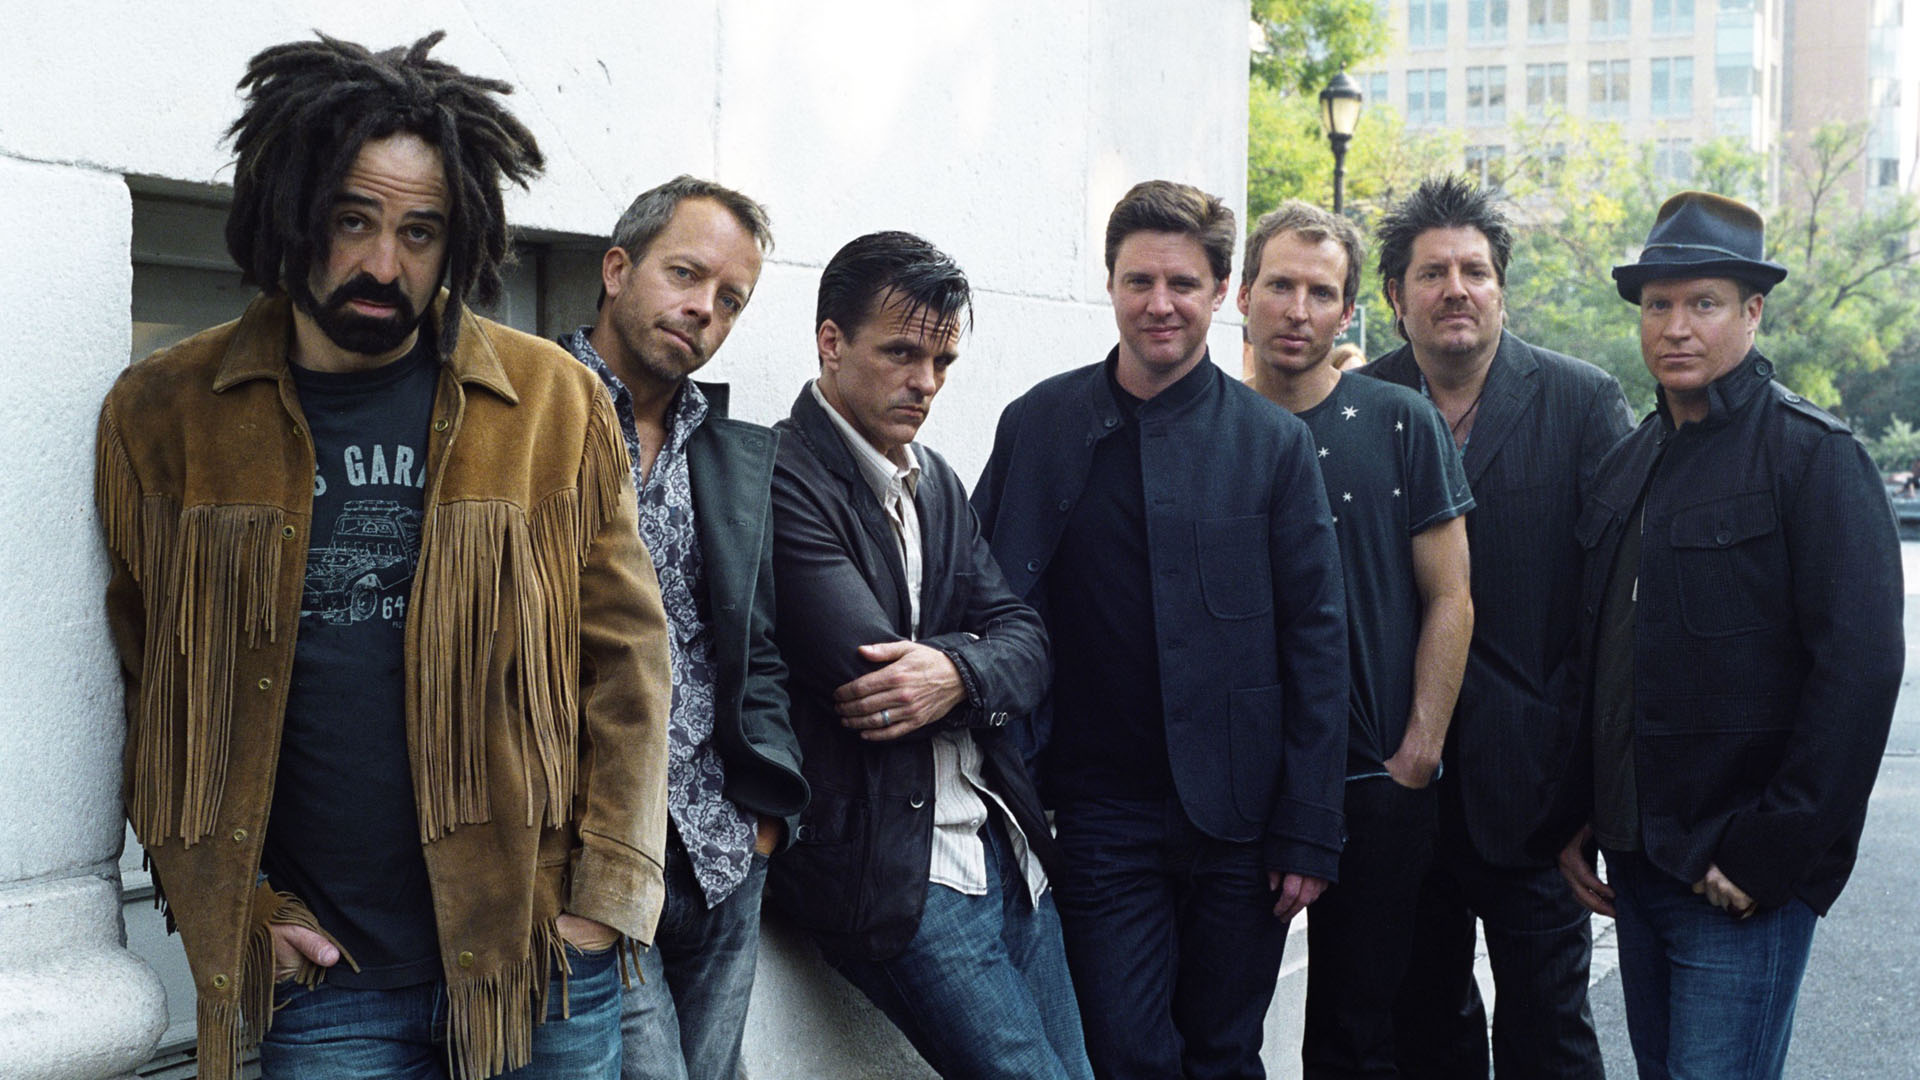 Counting Crows Take 'Somewhere Under Wonderland' Tour To Canada That